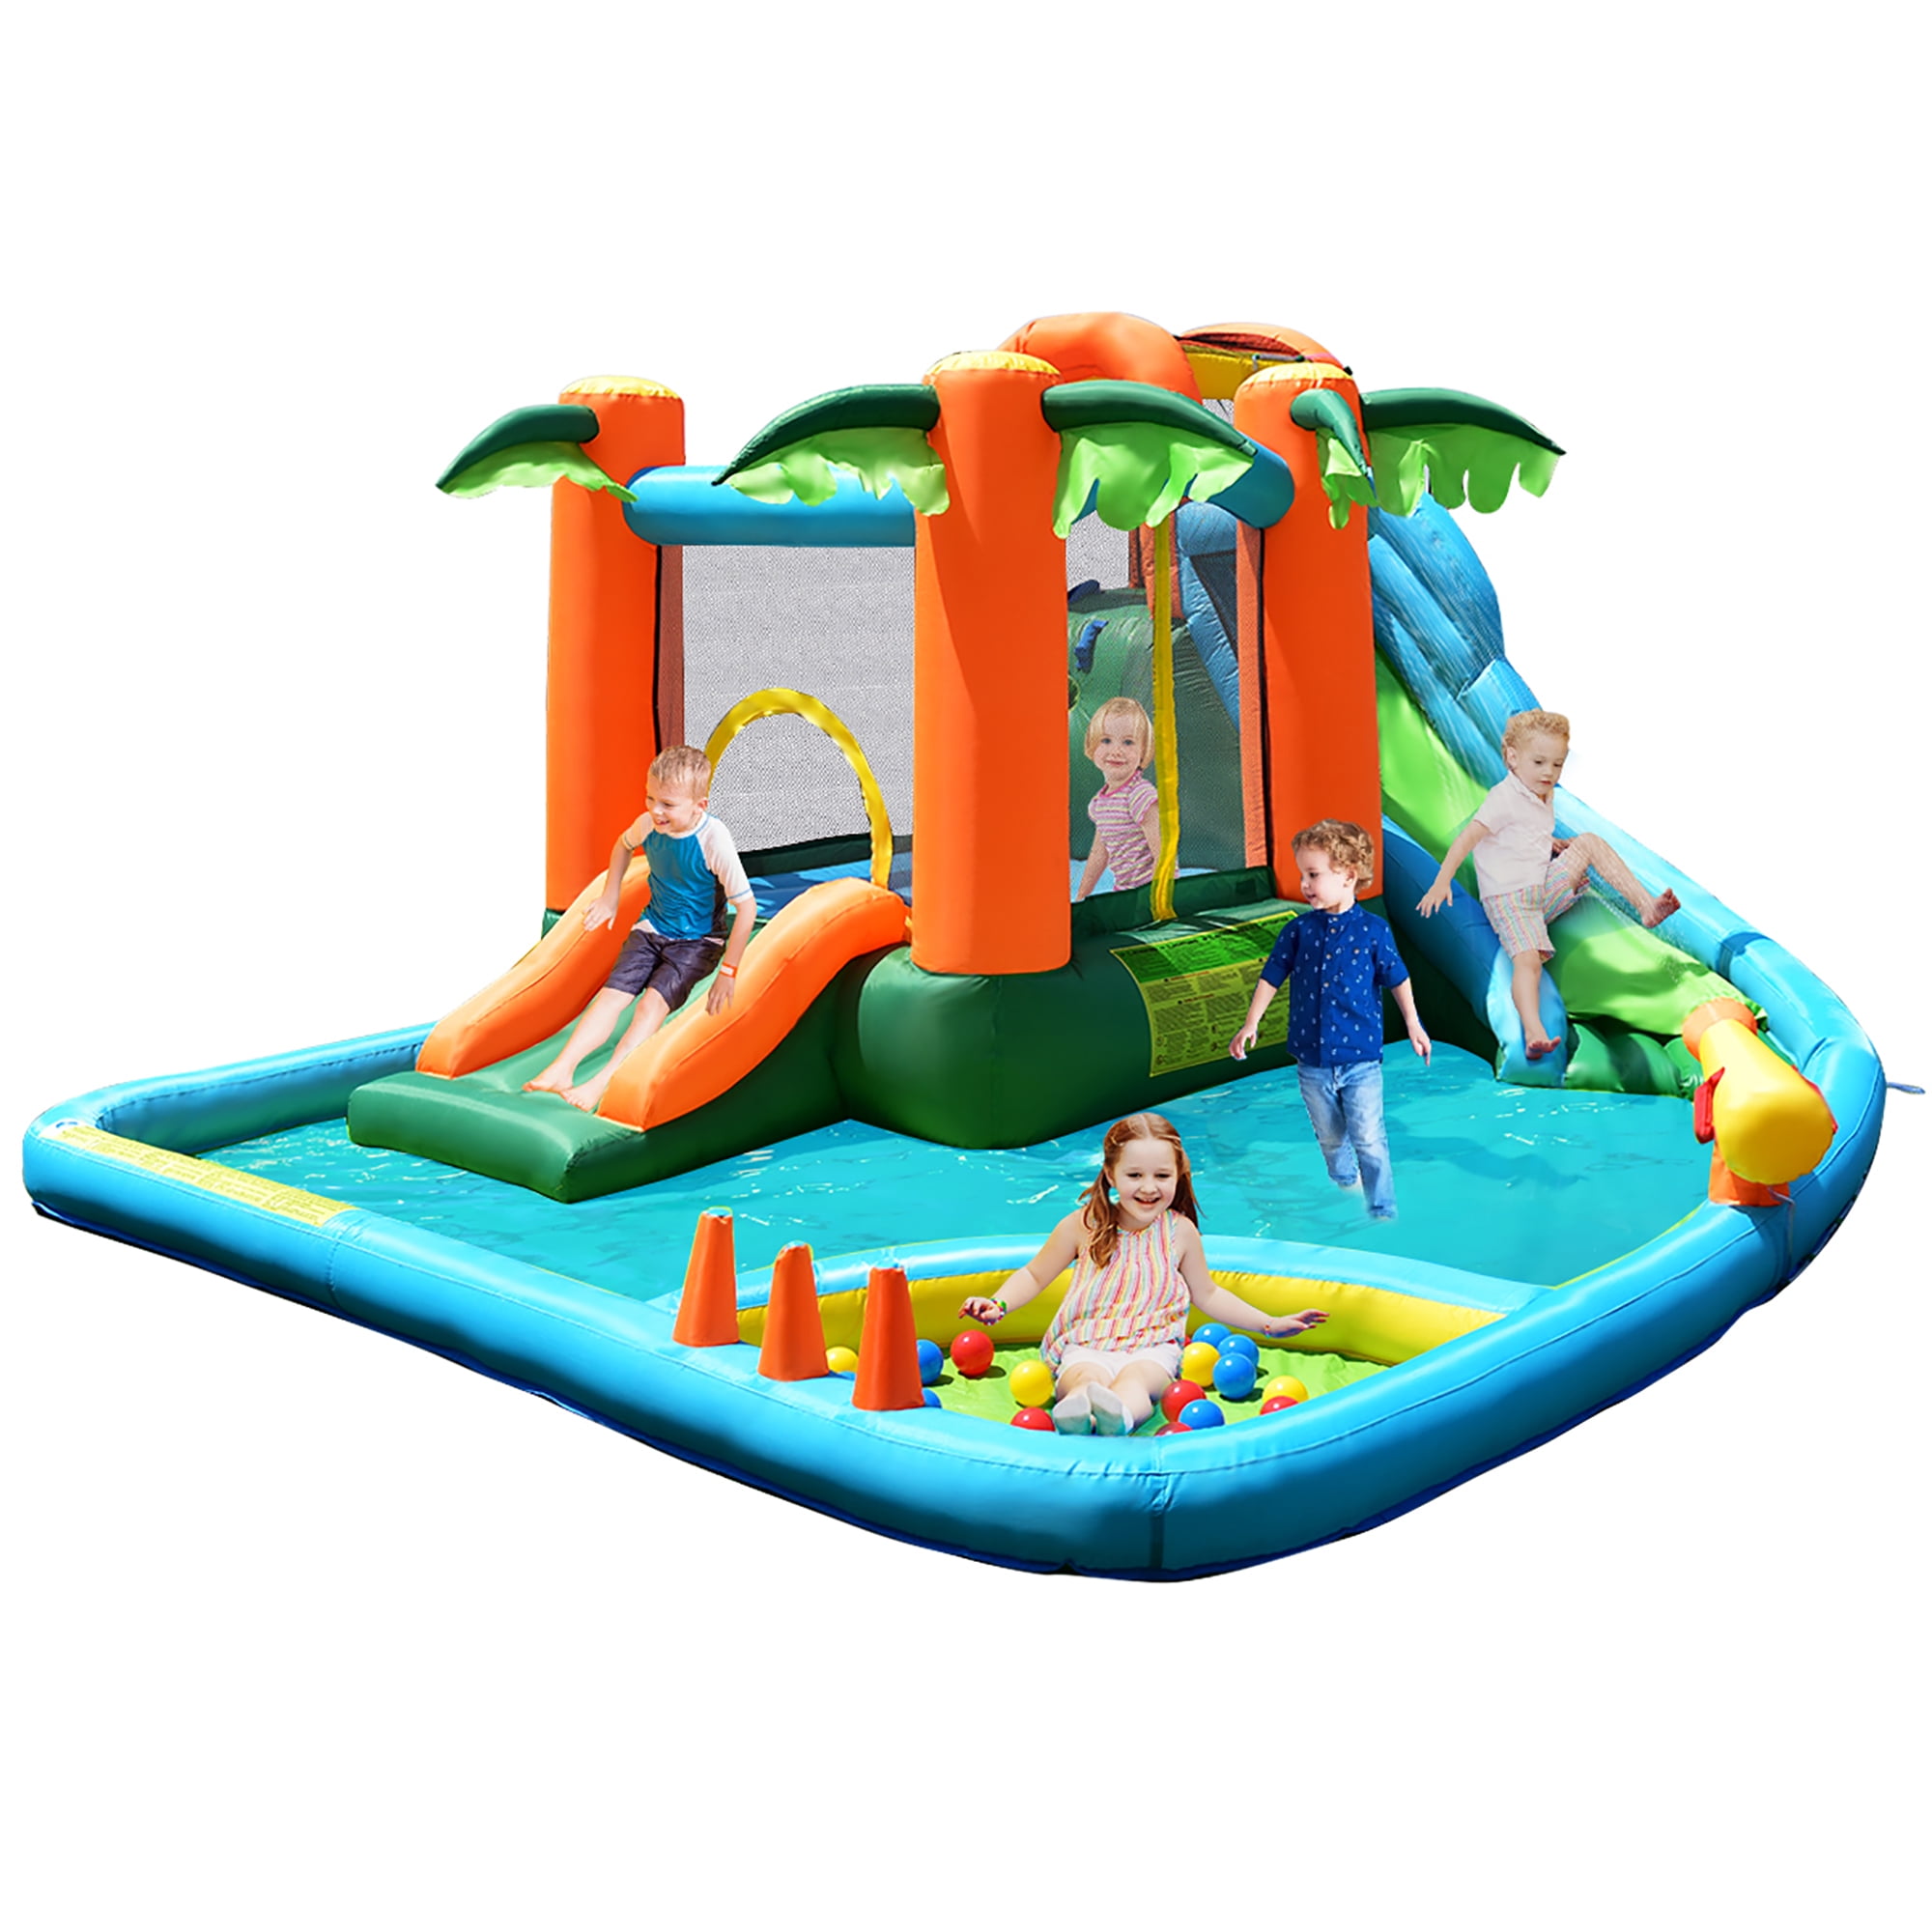 Inflatable Bounce House Kids Cartoon Castle Jumping Bouncer w/ Water Slide & Bag 